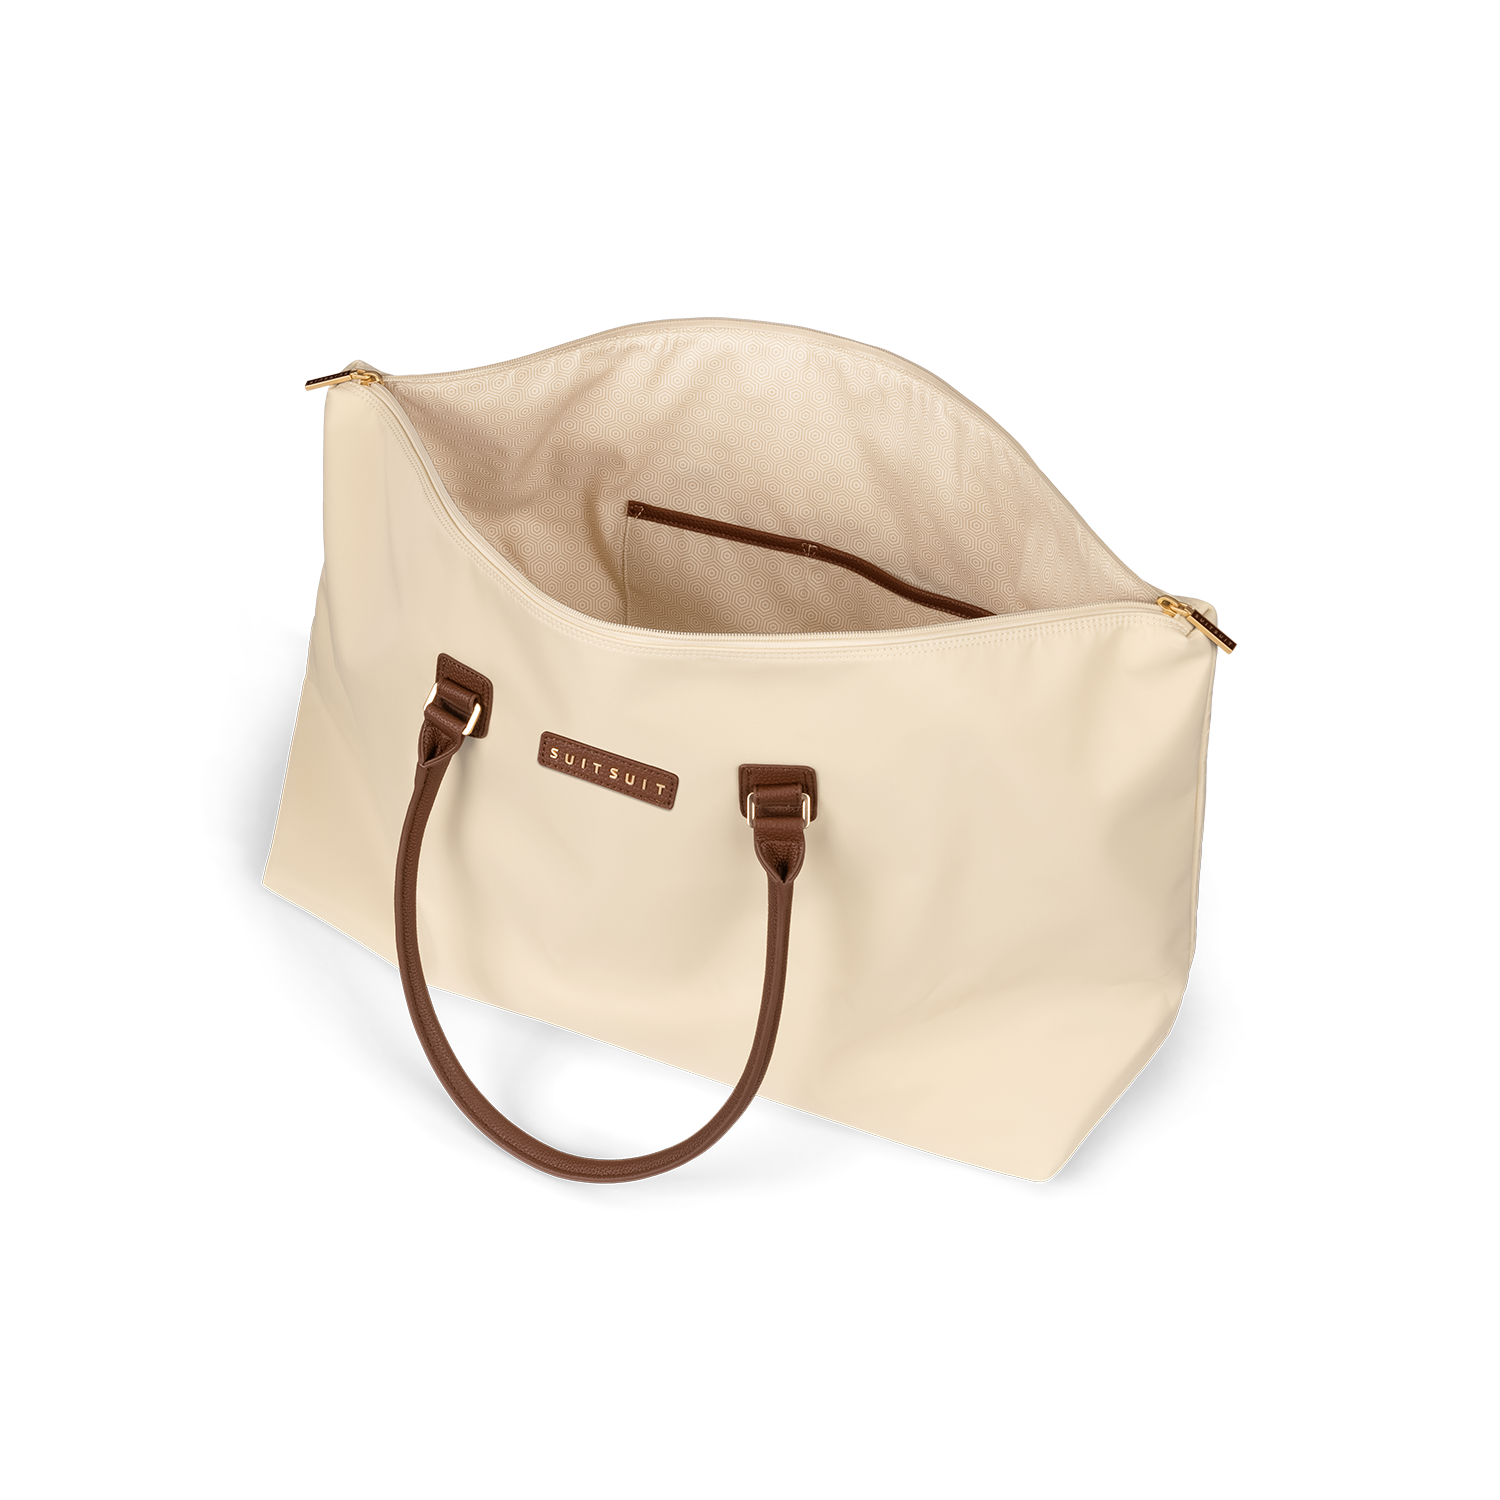 Fab Seventies - Antique White - Travel Tote